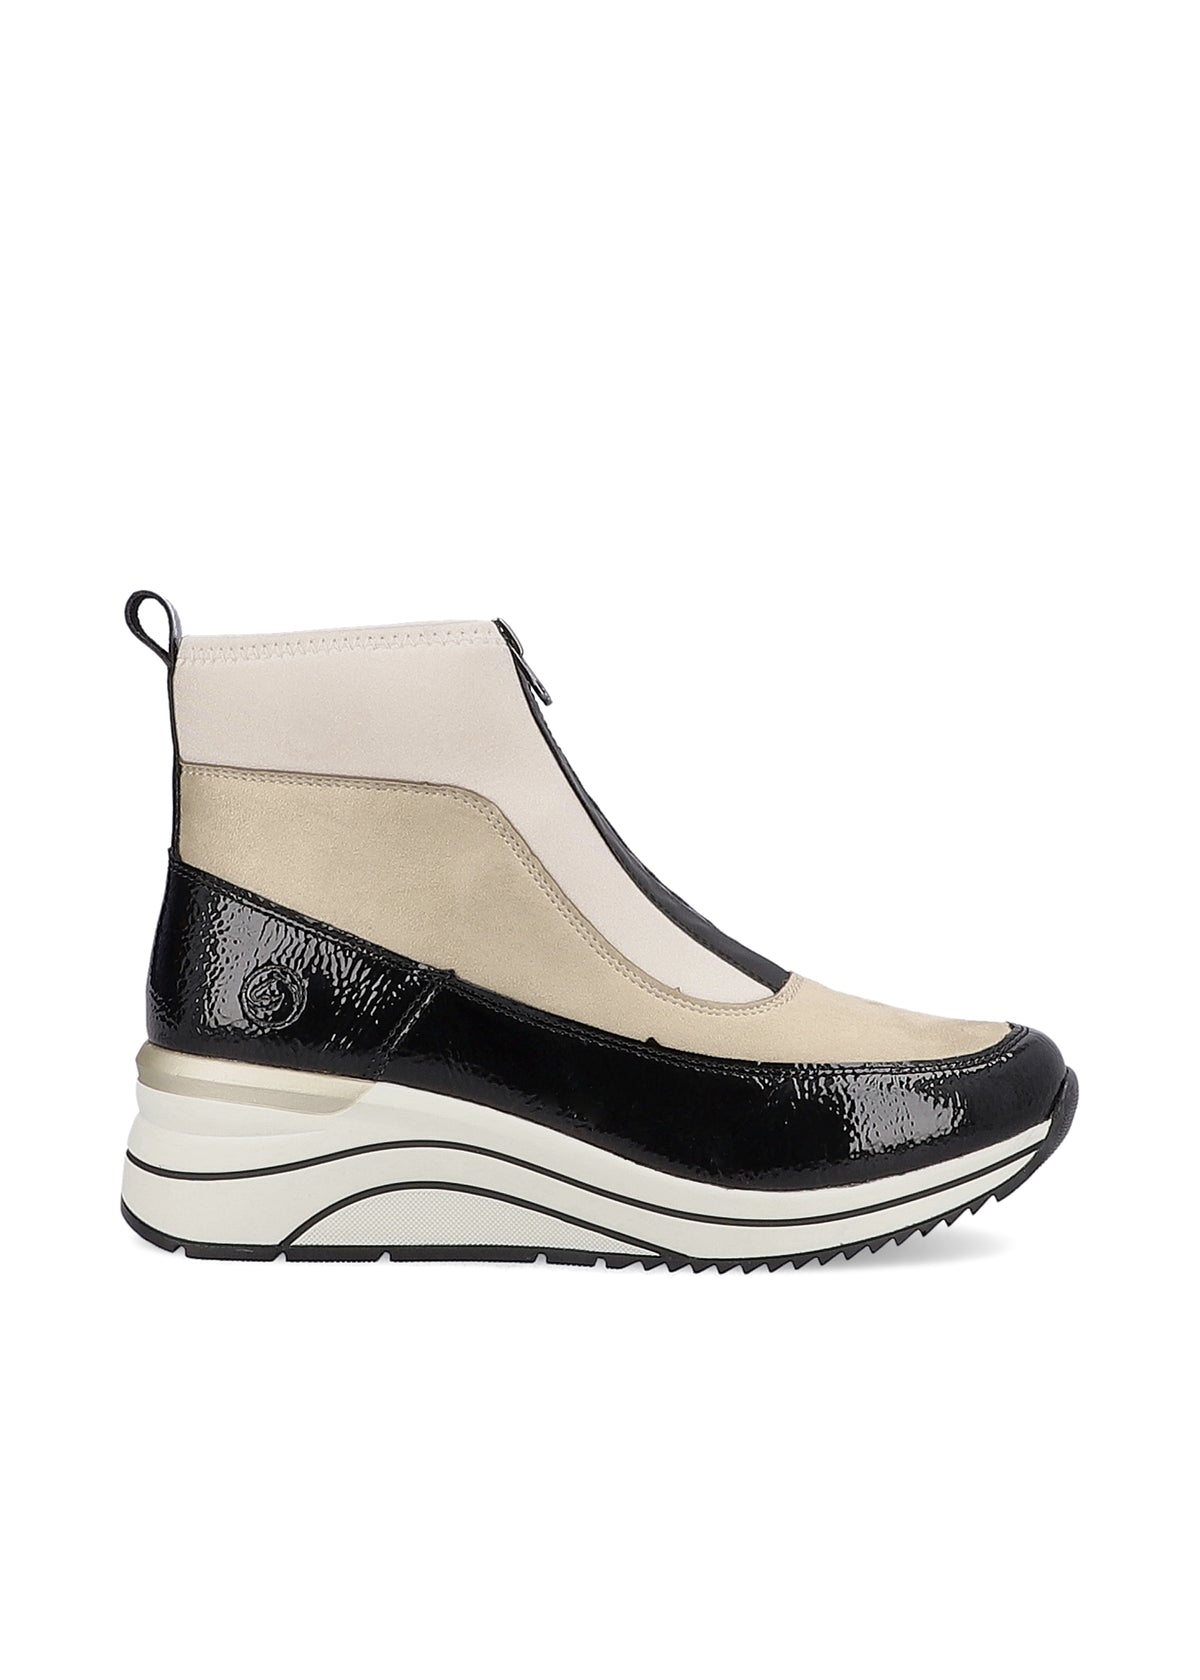 Ankle boots with a wedge heel - beige-black